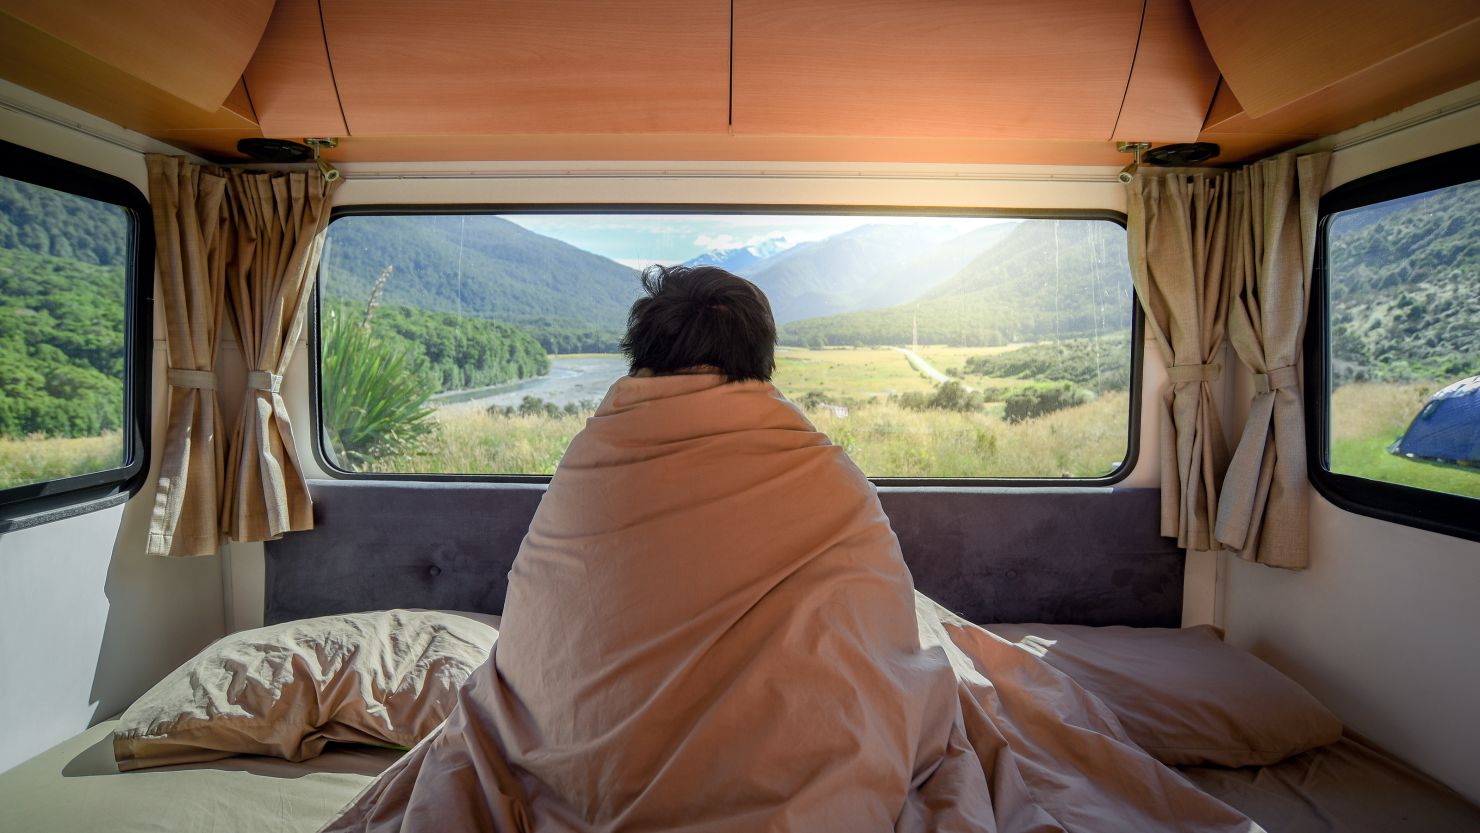 The 6 Best Uses for an Insulated Blanket to Keep You Warm on the Road